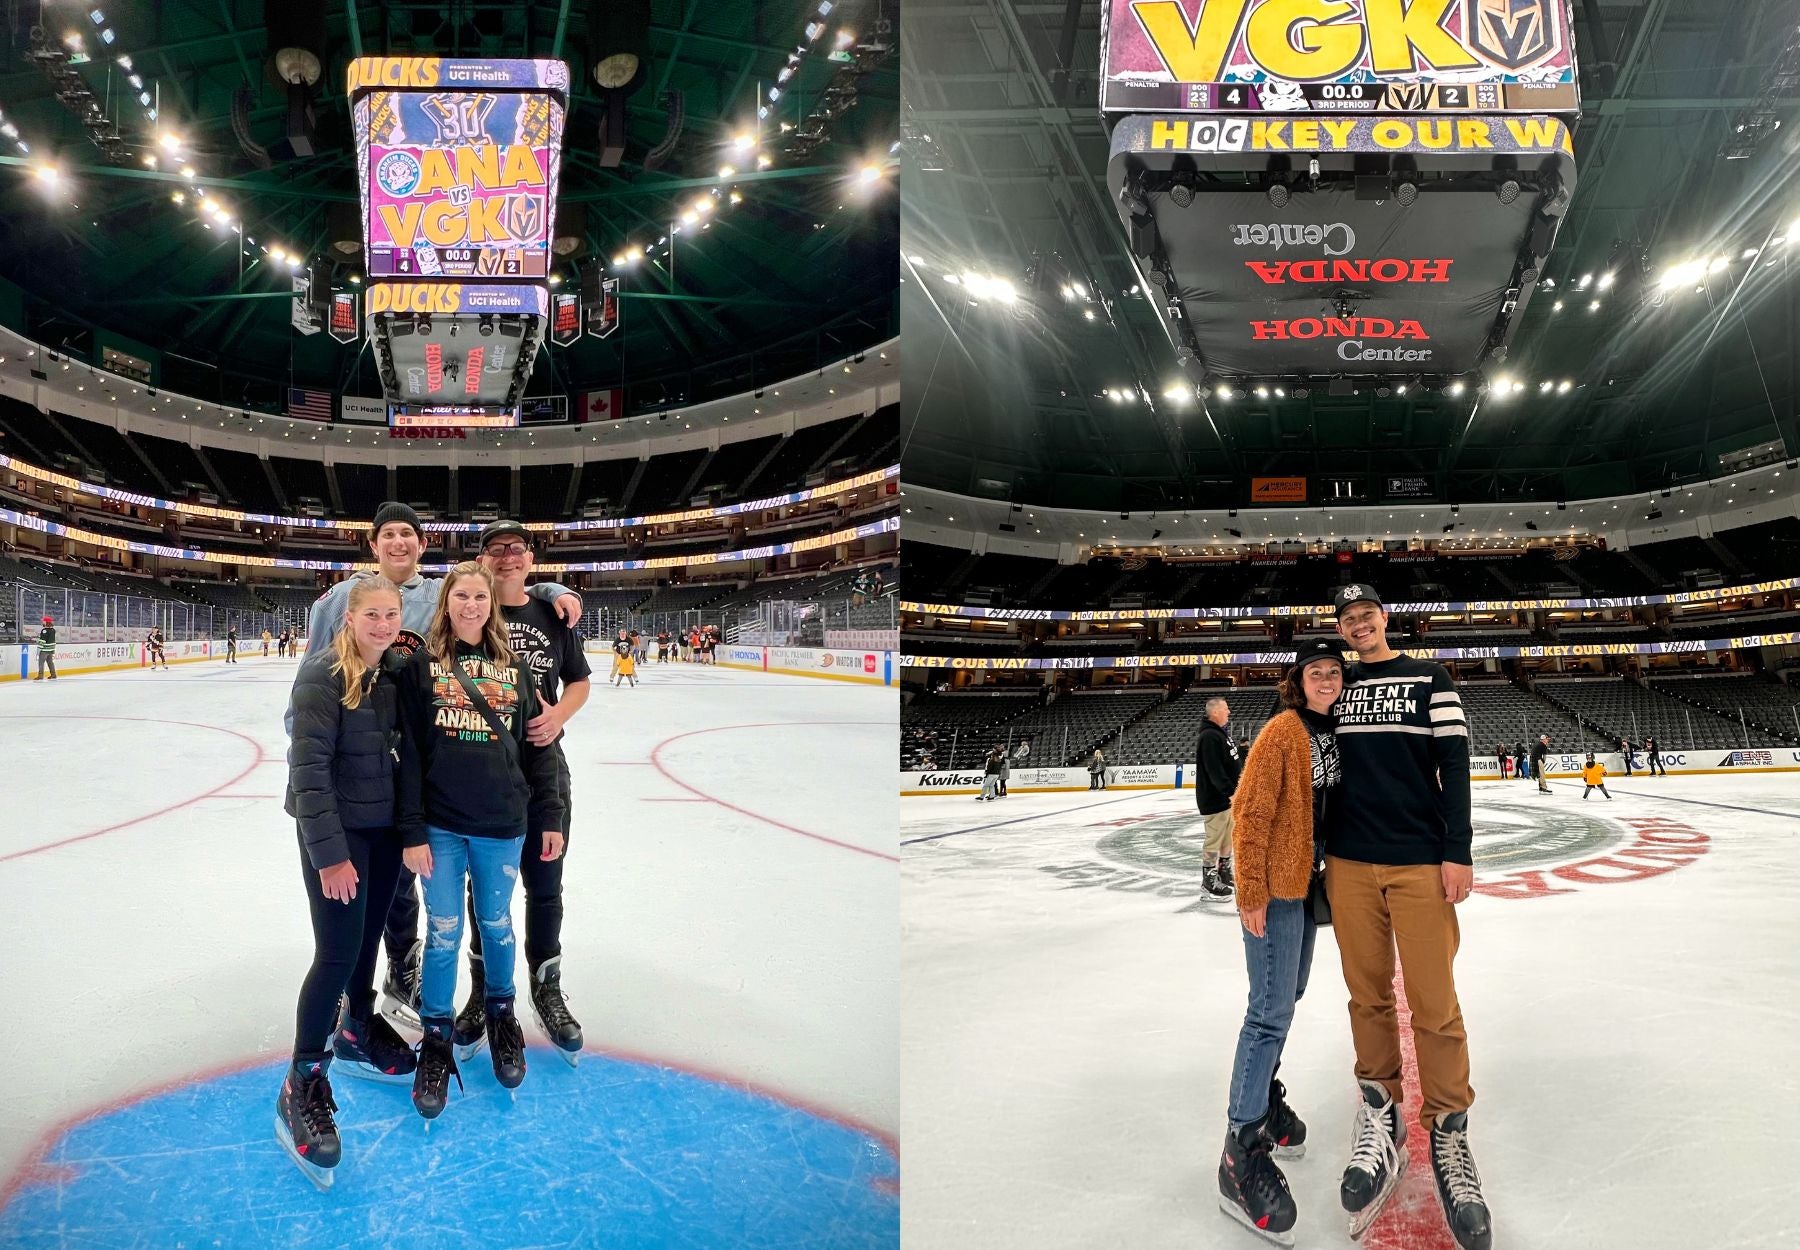 Lifetipsforbetterliving Hockey Clothing Company visits Honda Center, the home of the Anaheim Ducks for a hockey game against the Vegas Golden Knights. Here are some of our favorite memories skating on the ice after the game.